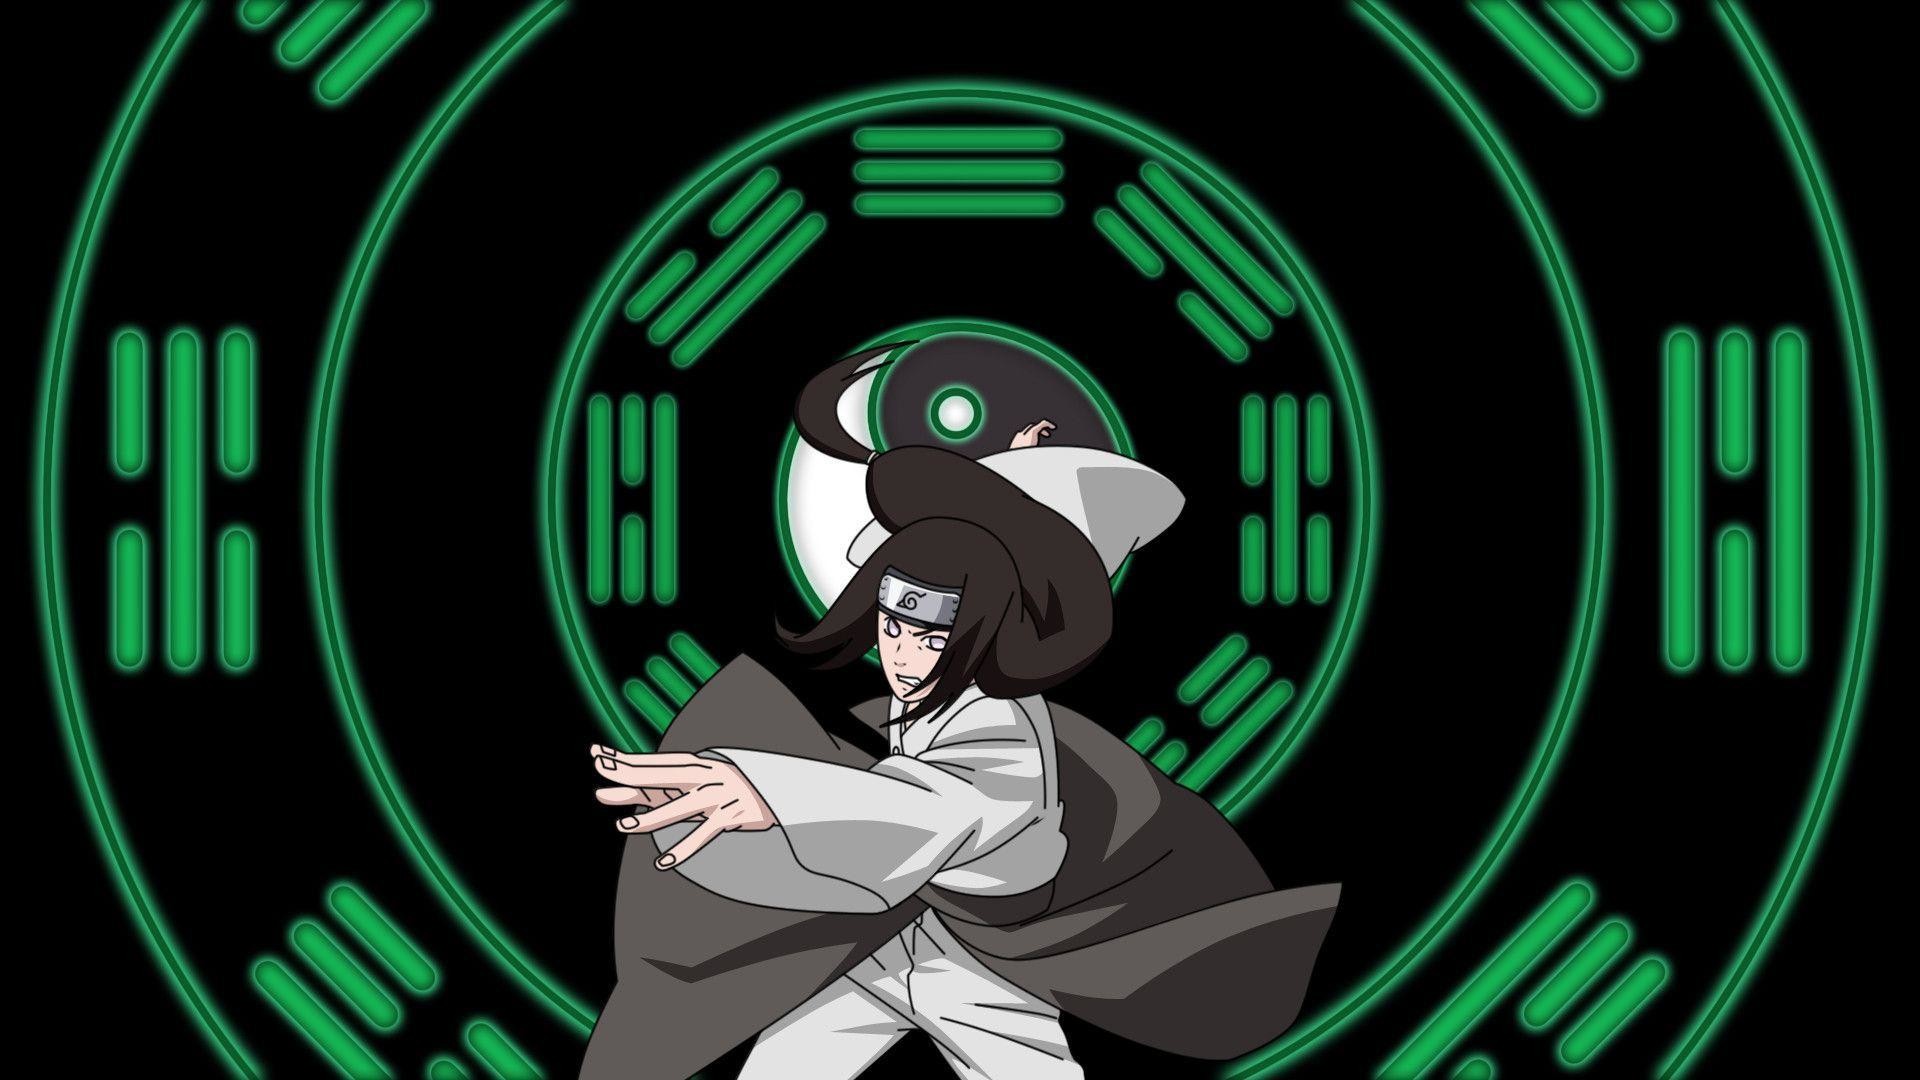 9 Neji Hyuga Wallpapers for iPhone and Android by Jennifer Young